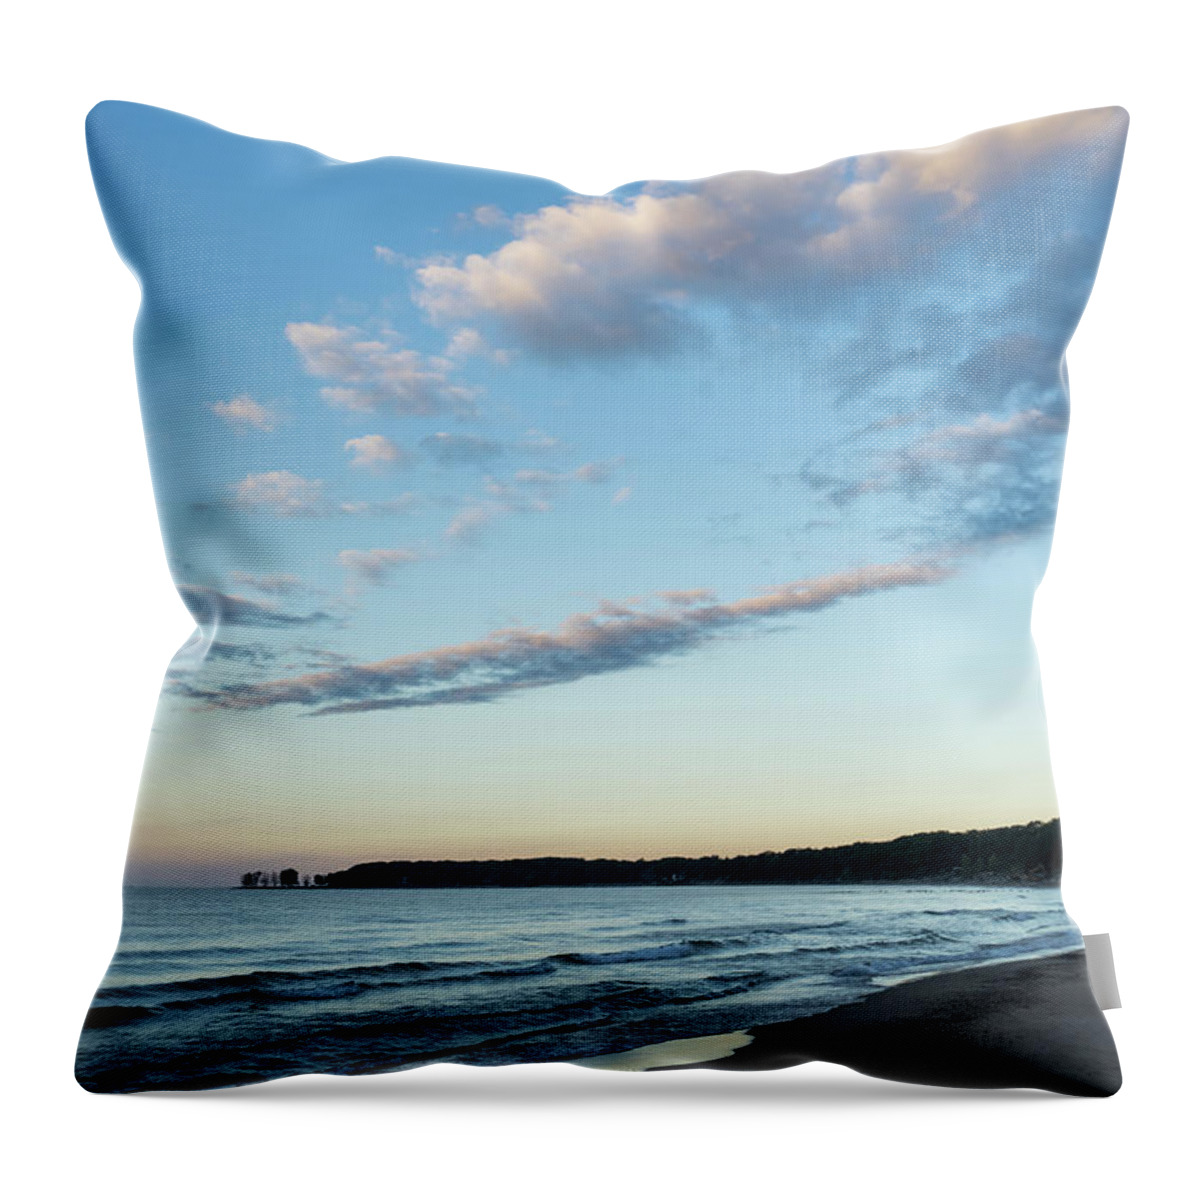 Moonset Throw Pillow featuring the photograph Morning Moonset - Lorraine Bay Lake Erie North Shore by Georgia Mizuleva